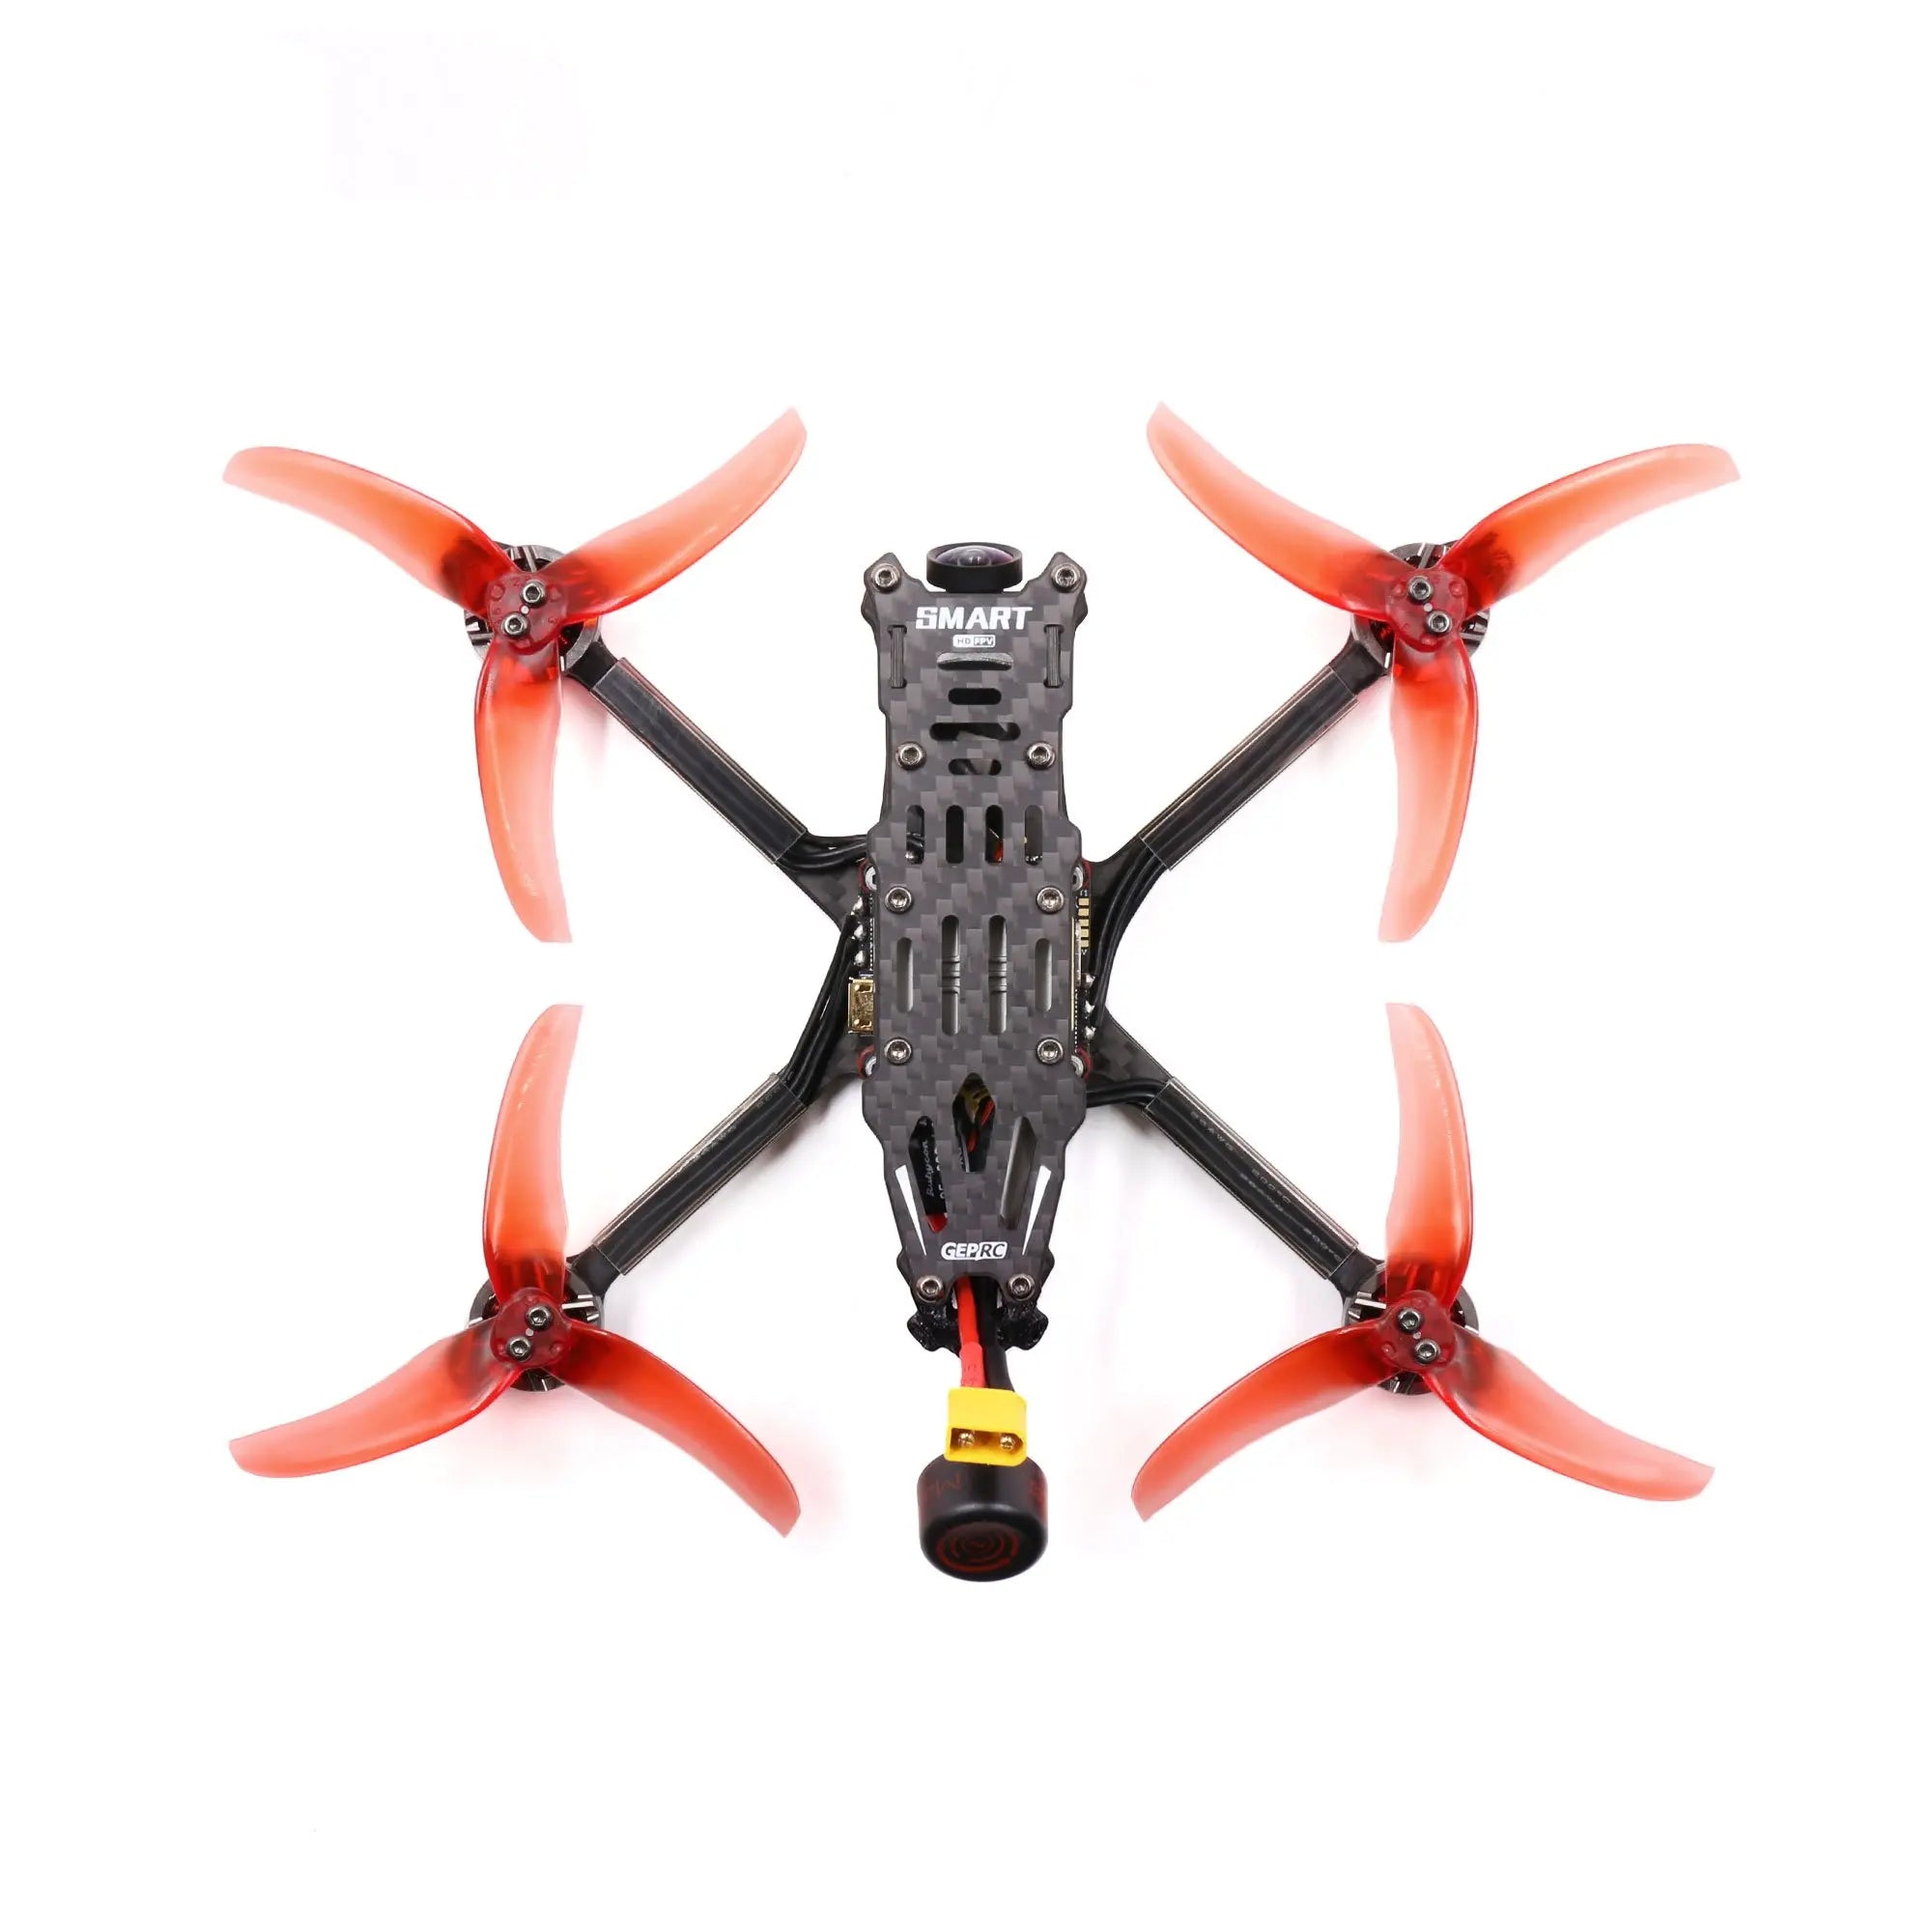 GEPRC SMART 35 FPV Drone, SMART 35 Freestyle was independently designed a GoPro camera mount . SM